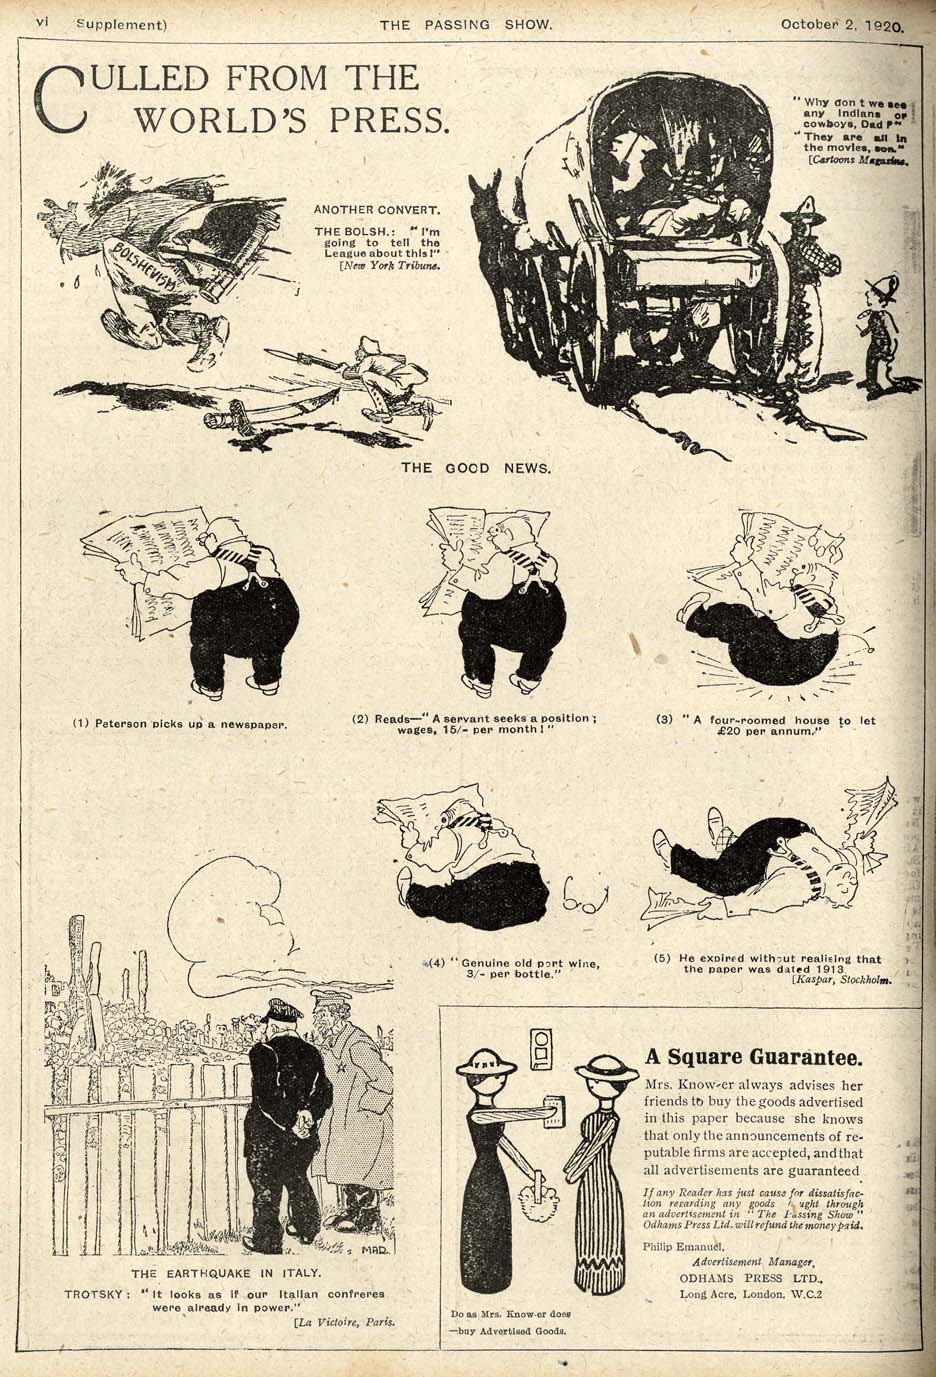 The World's Cartoons, 1920's The Passing Show